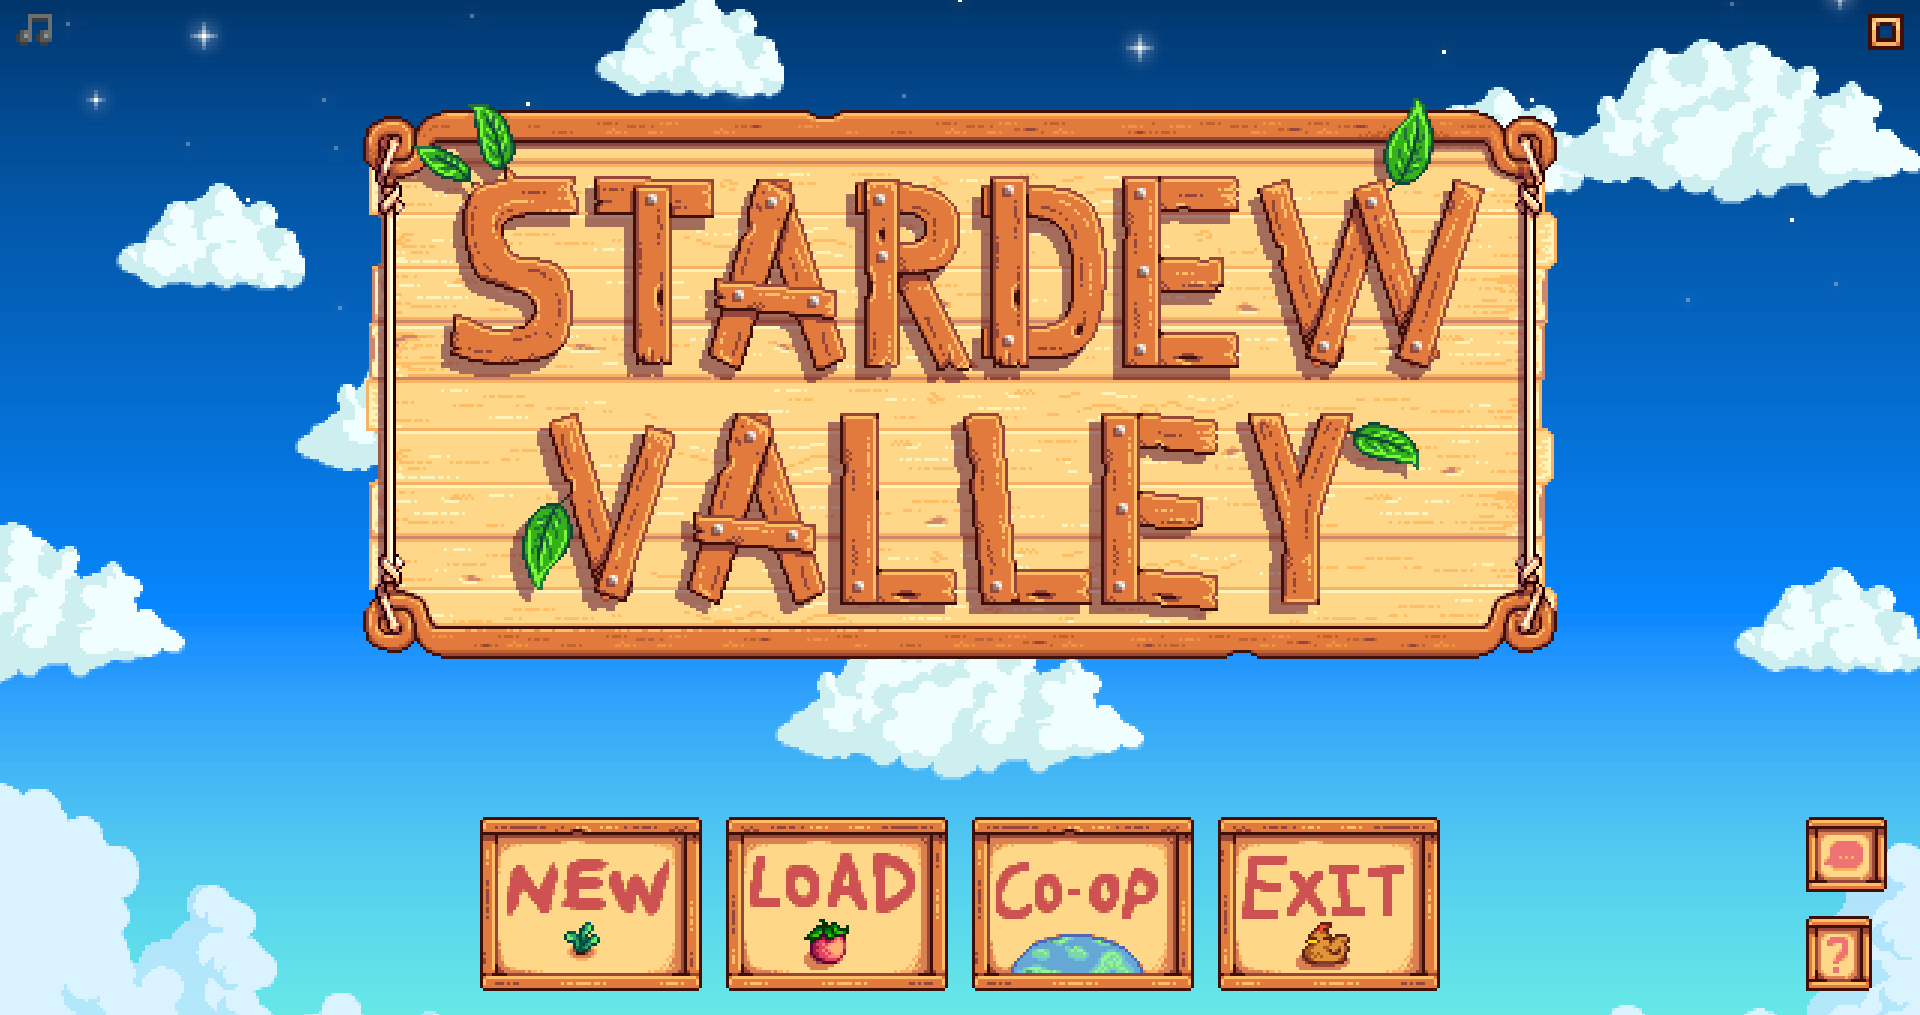 How to host Stardew Valley Co-op multiplayer session? Platforms